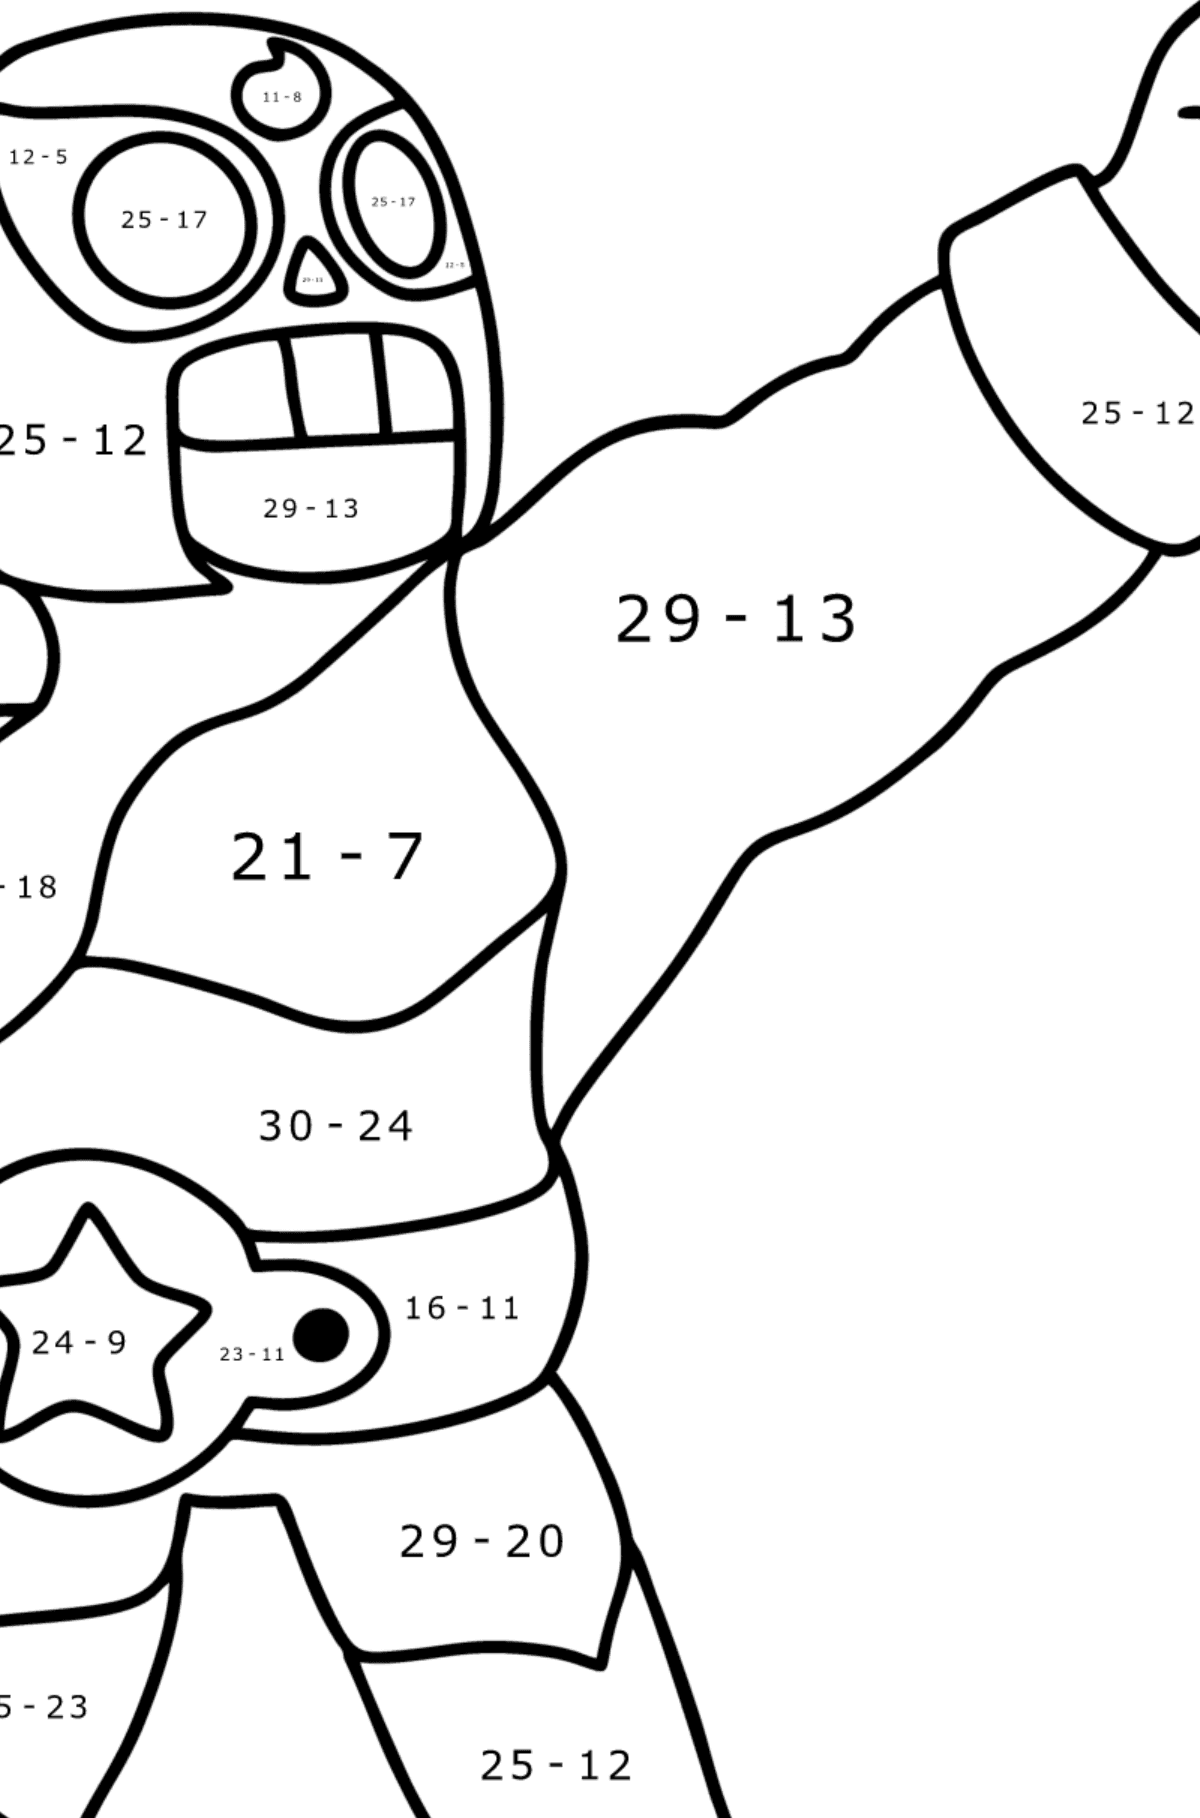 Brawl Stars El Primo coloring page - Math Coloring - Subtraction for Kids